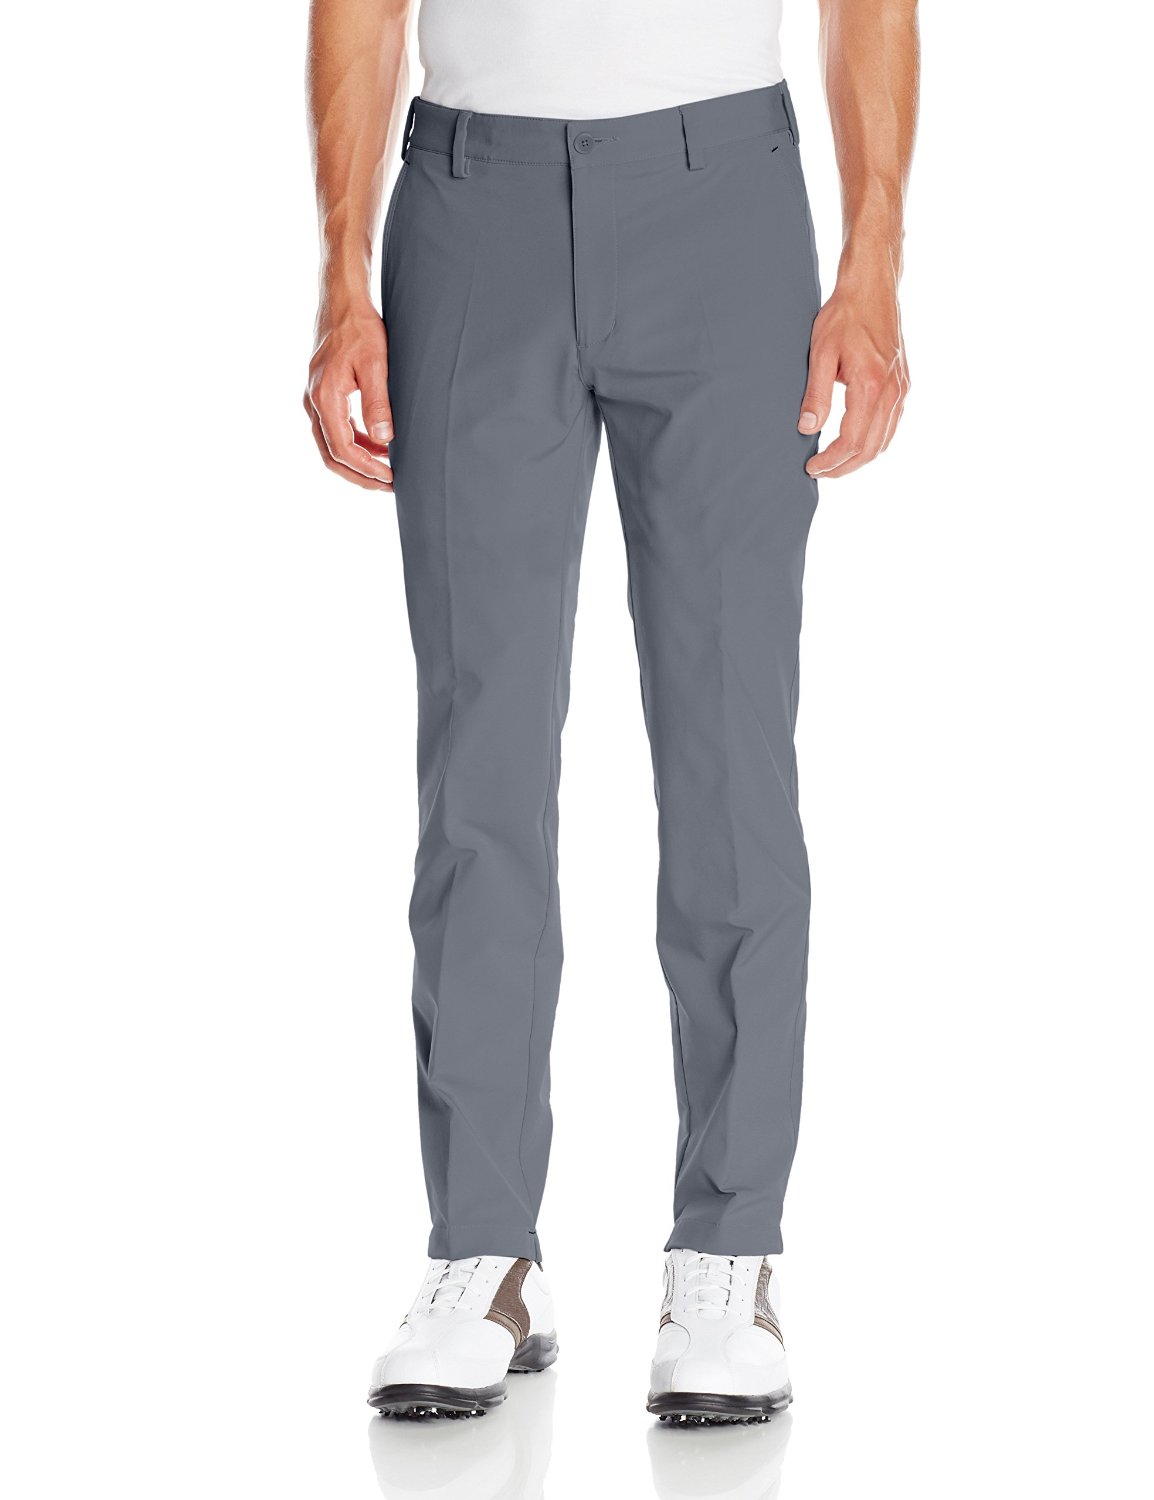 Mens Golf Trousers / Pants Collection